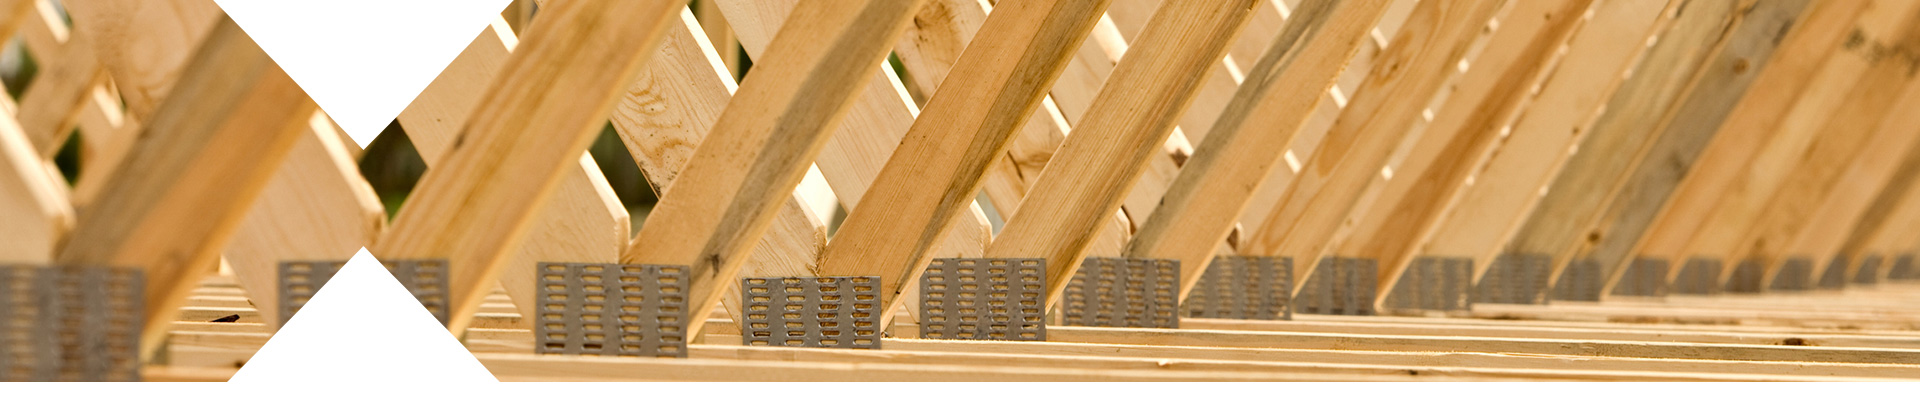 Design and manufacture of good quality dry wood roof truss structures - Laval, Montreal